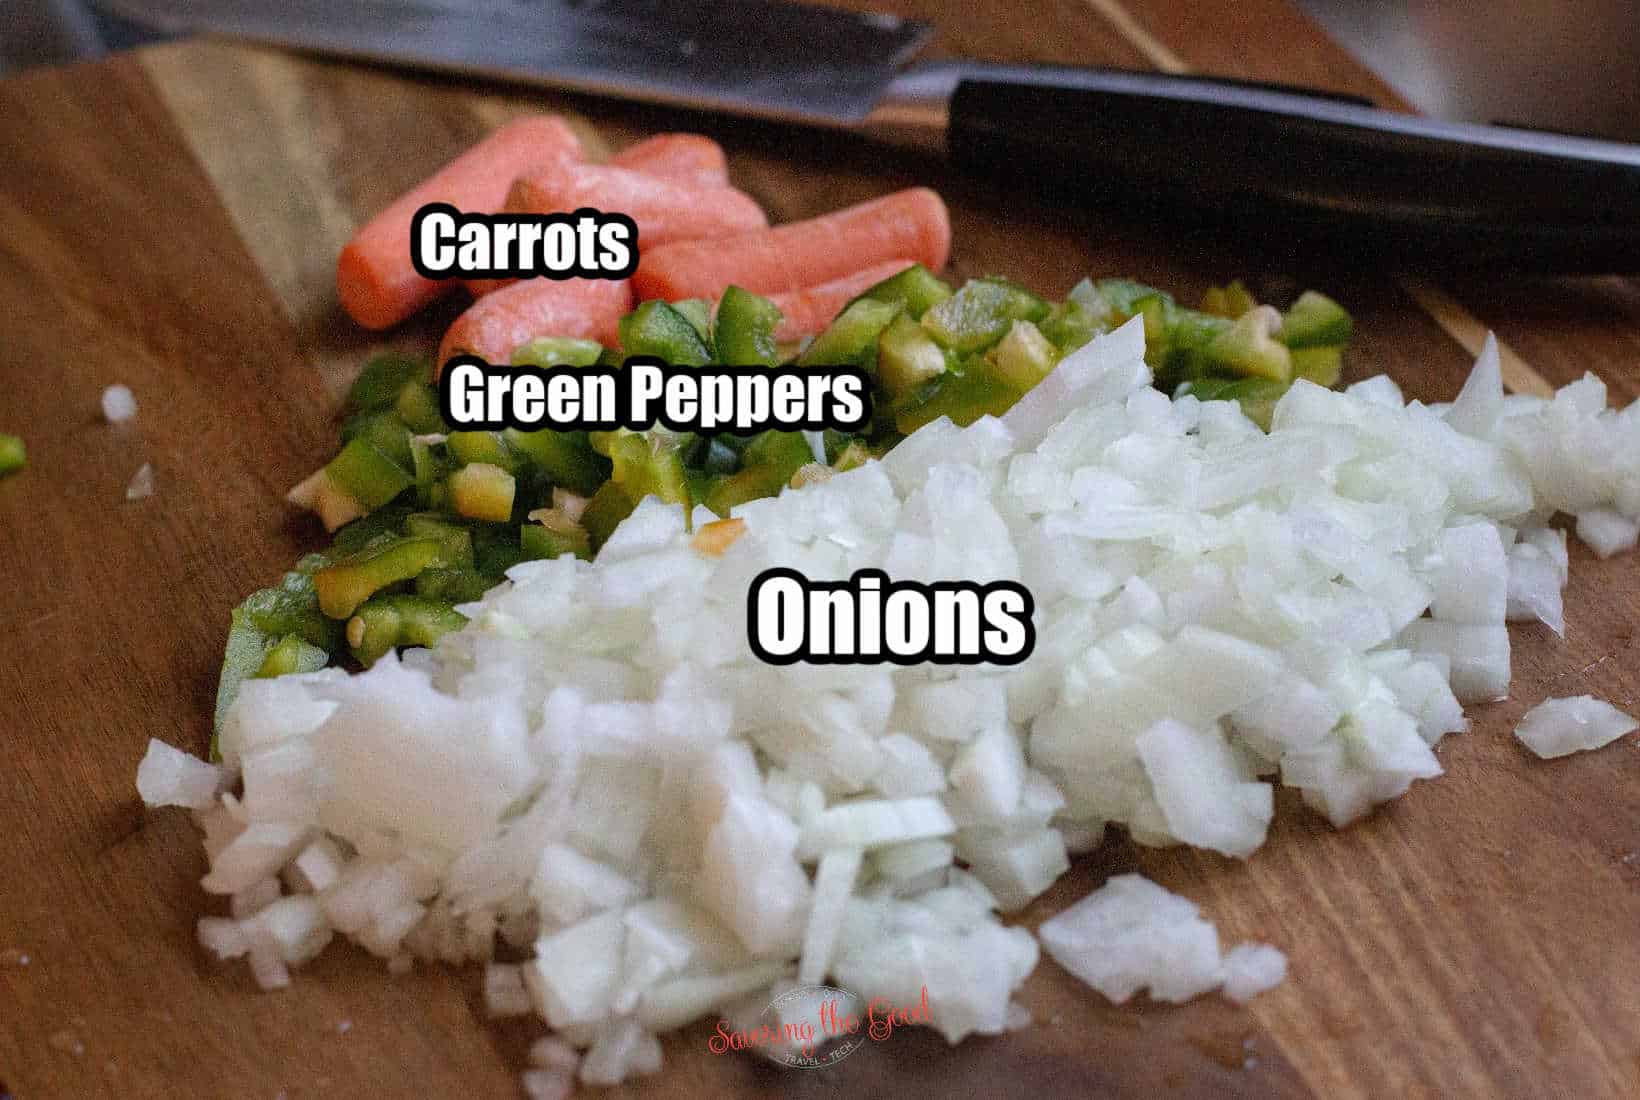 chopped onions pepper and carrot on a cutting board with text overlay labeling the ingredients